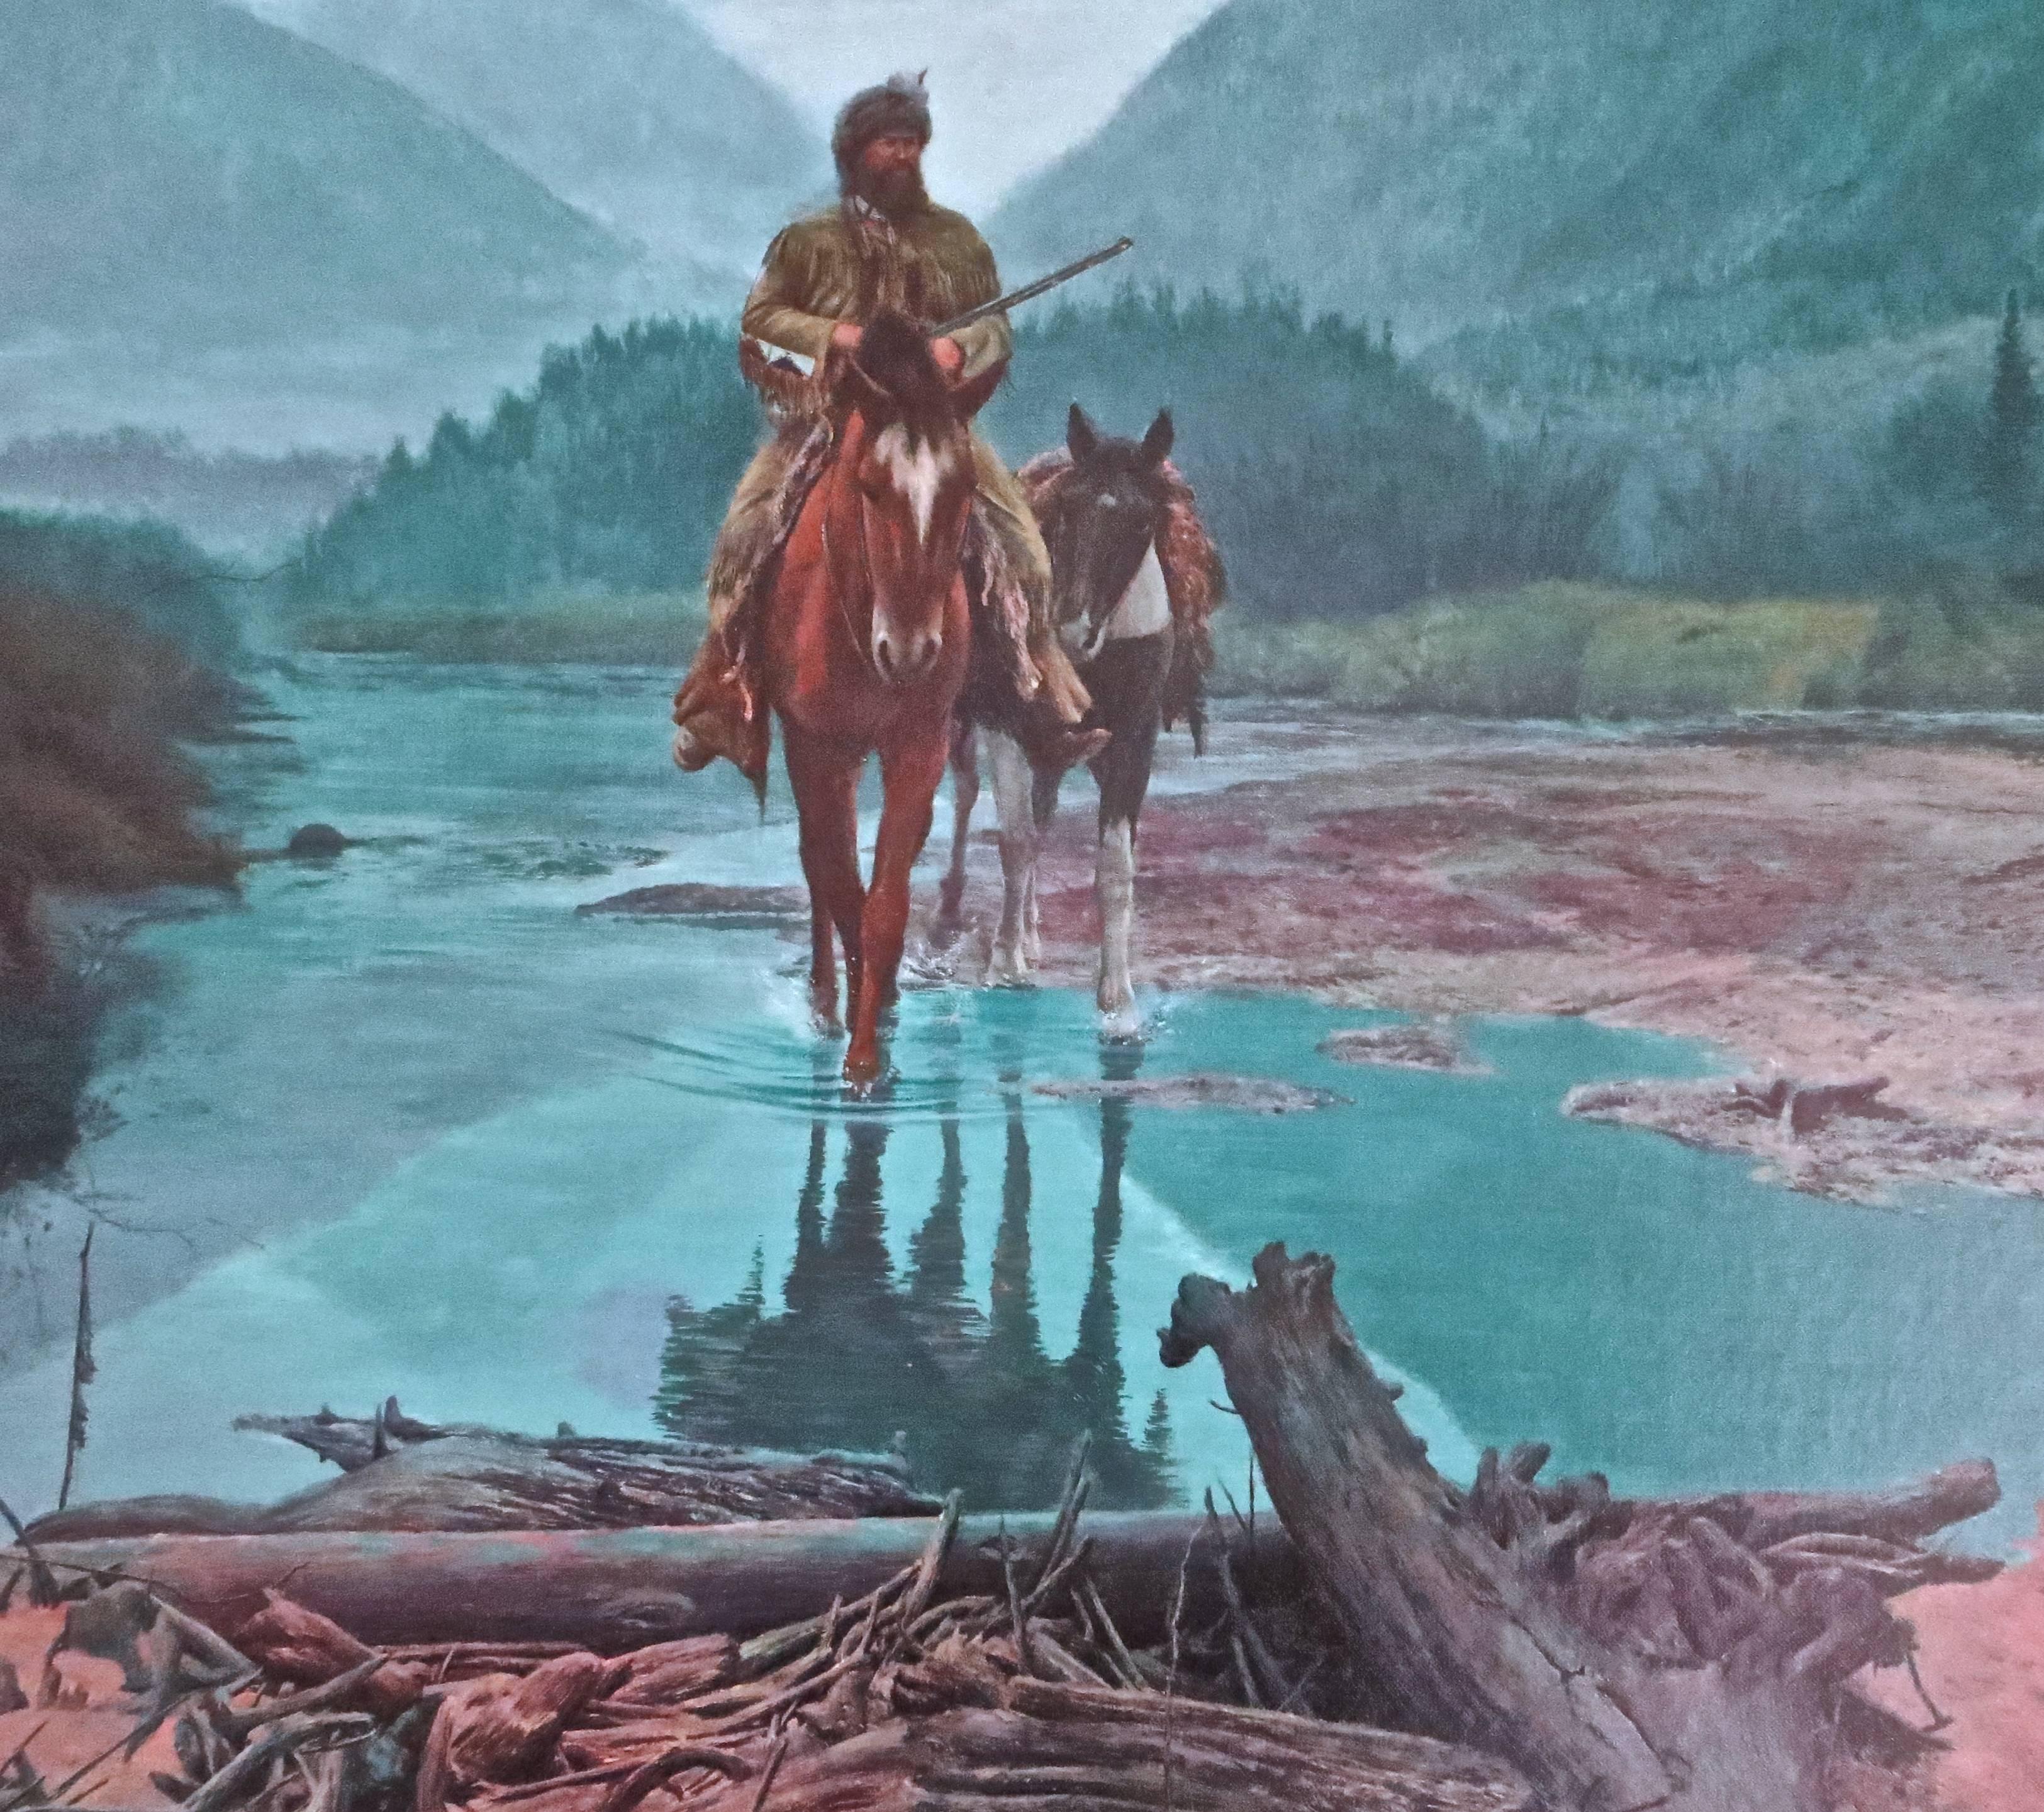 Painted in 1981, this iconic image of a trapper riding through a pond in the early morning hours of a Pacific Northwest setting is featured, and is the frontispiece for Dee Brown's book 